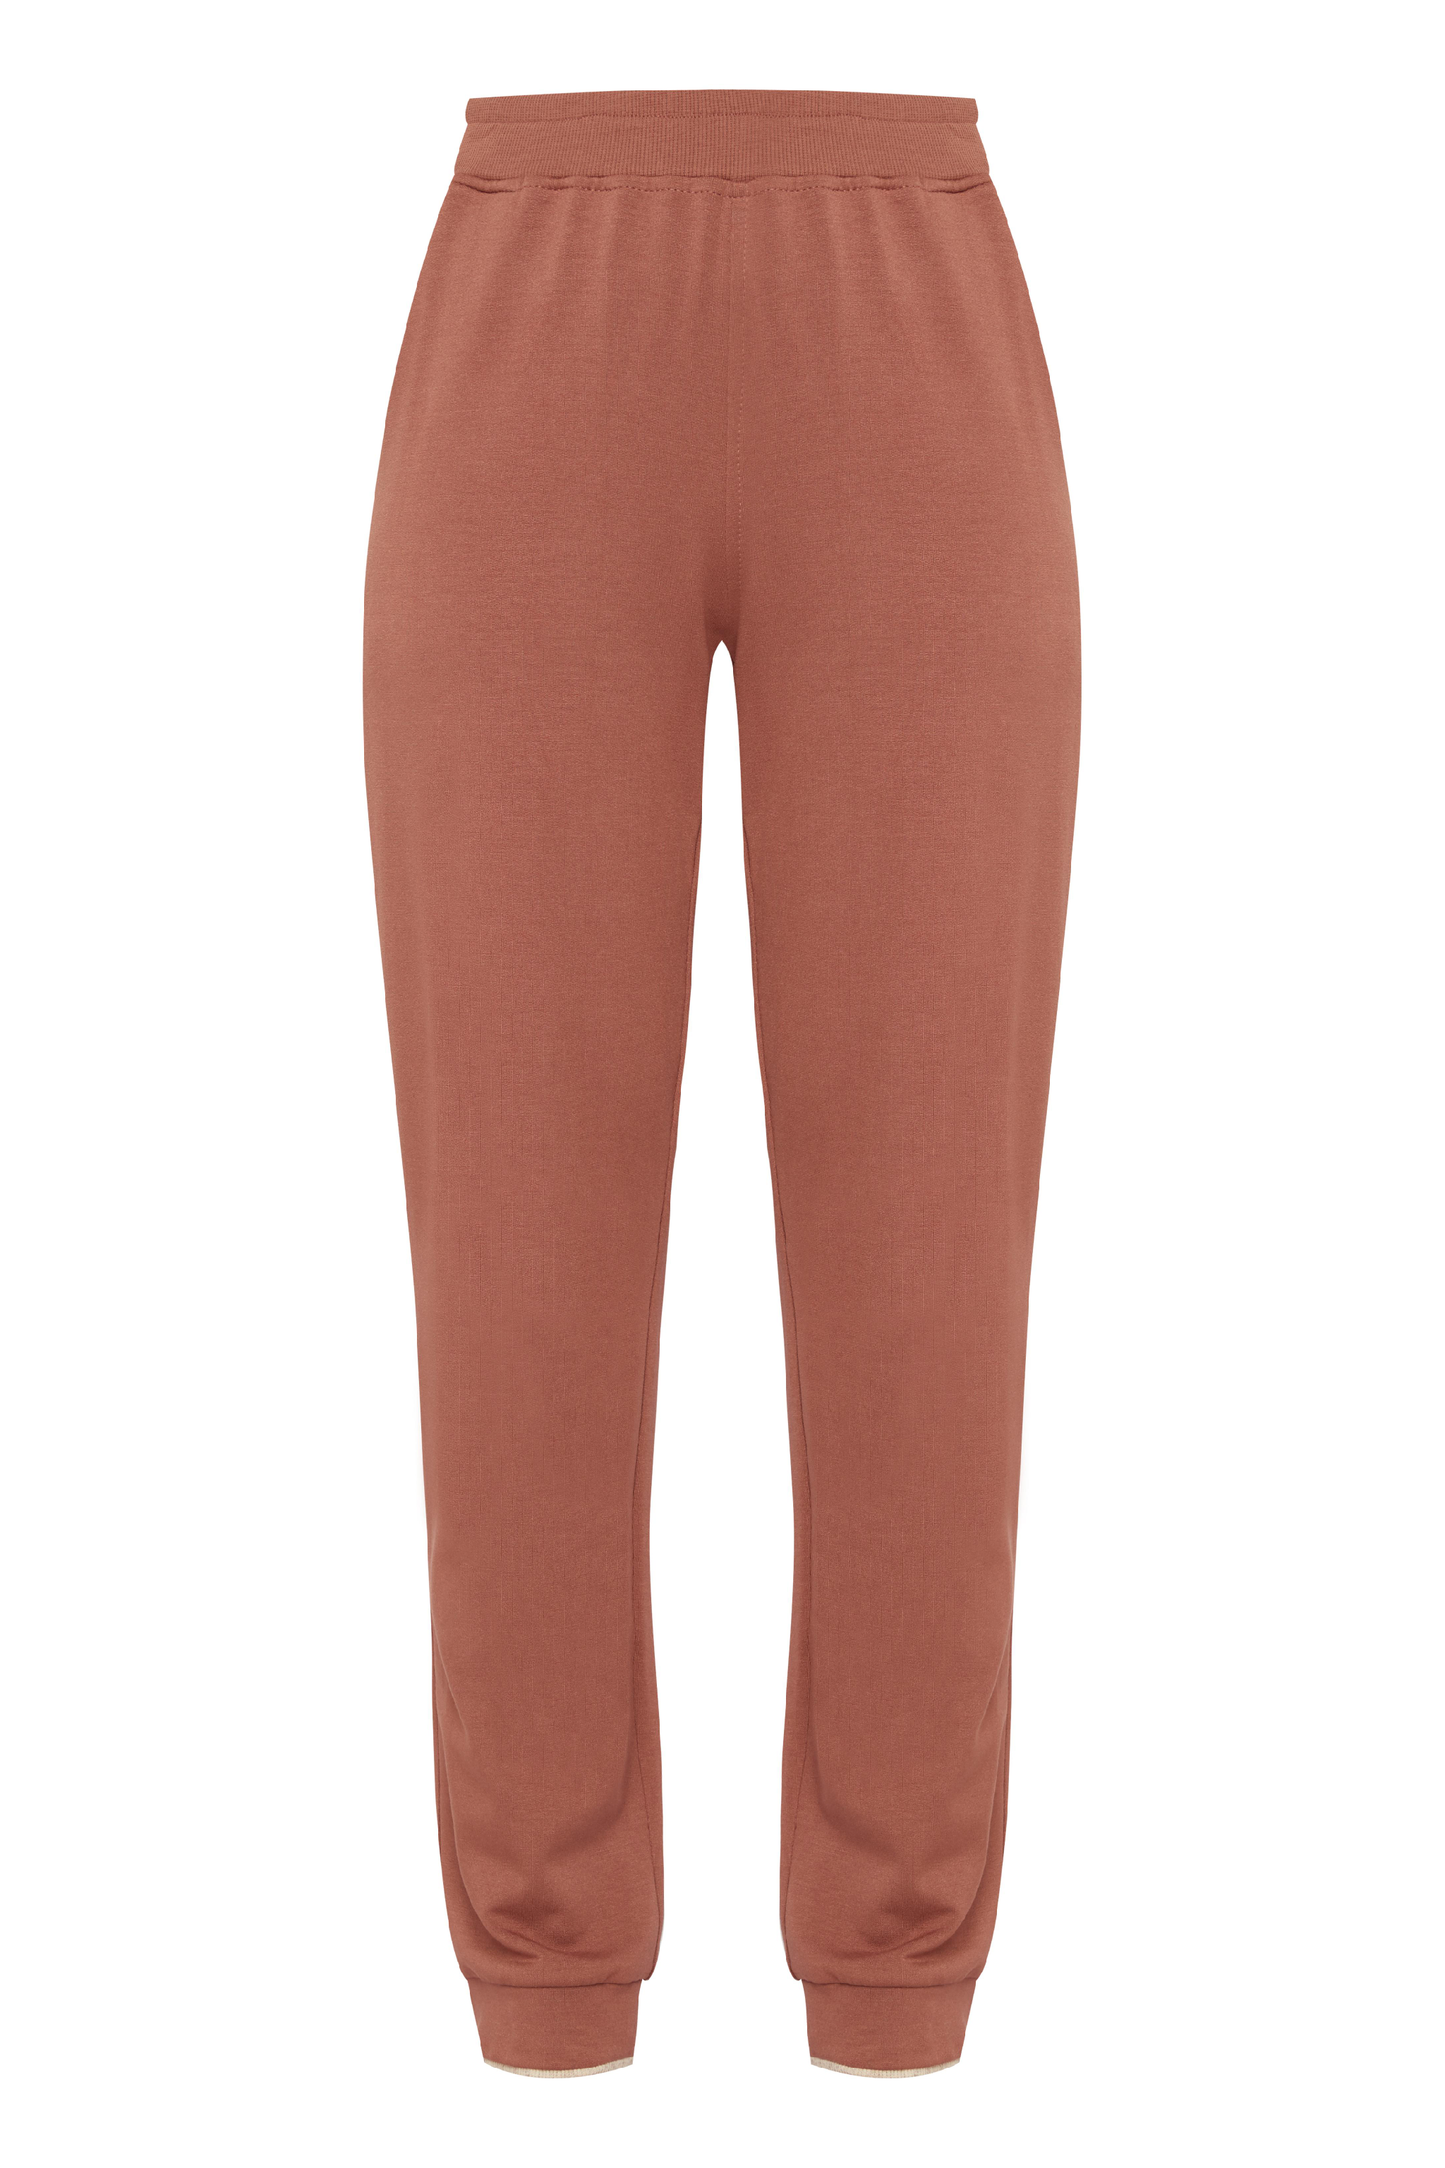 Twinset trousers